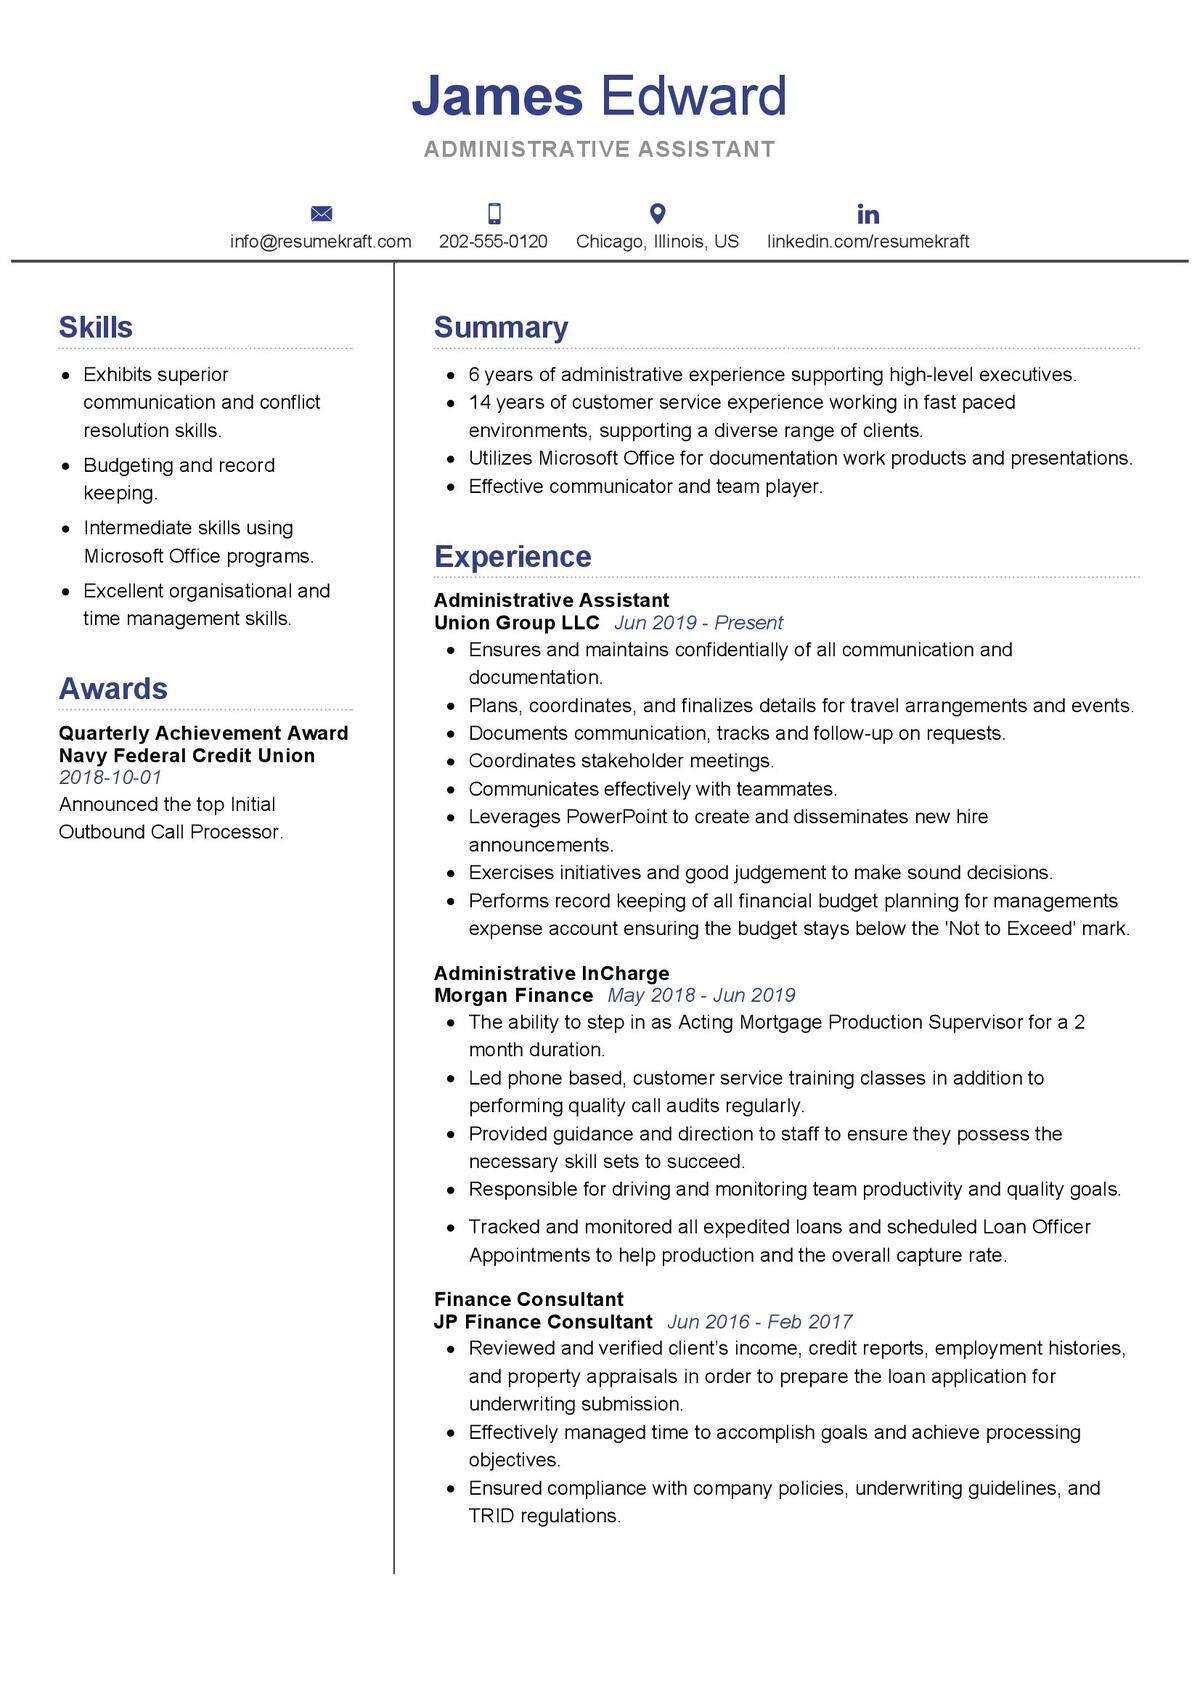 Sample Professional Resume for Administrative assistant Administrative assistant Resume Sample 2021 Writing Guide …